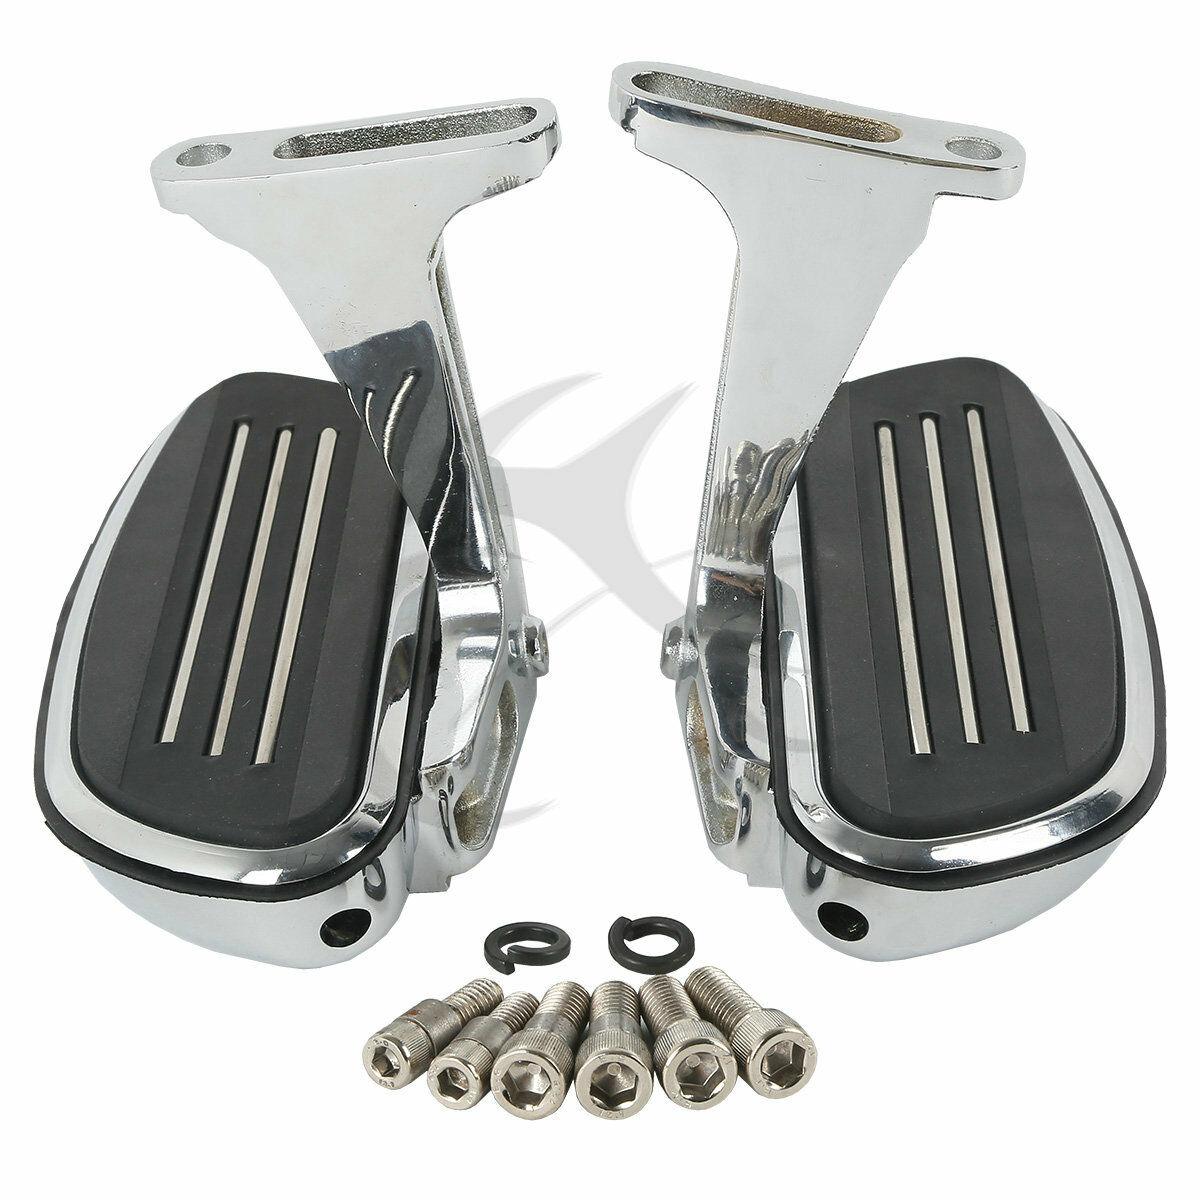 Pegstreamliner Passenger Foot Floor board Fit For Harley Touring Road Glide 93+ - Moto Life Products